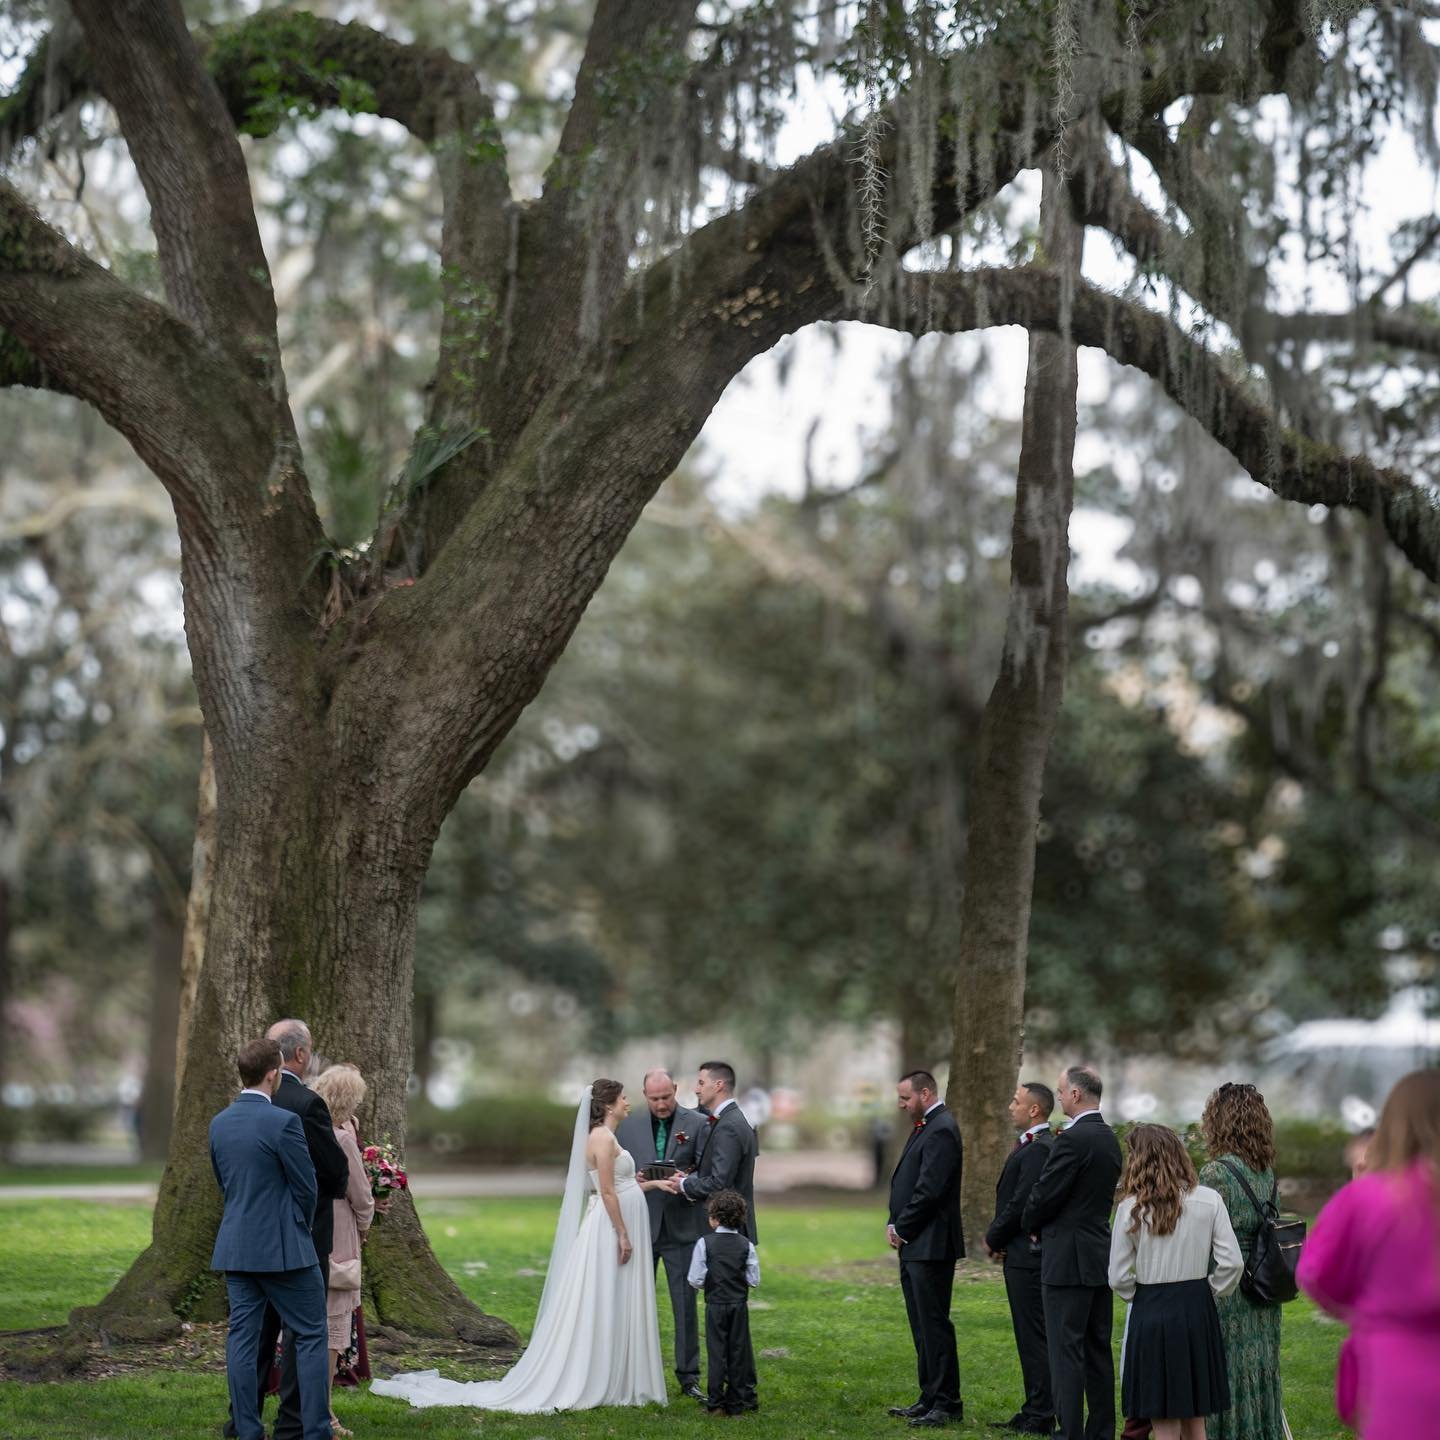 Commitment beneath the #liveoaks of #forsythpark #savannahga Reach out to learn more about our #wedding photography